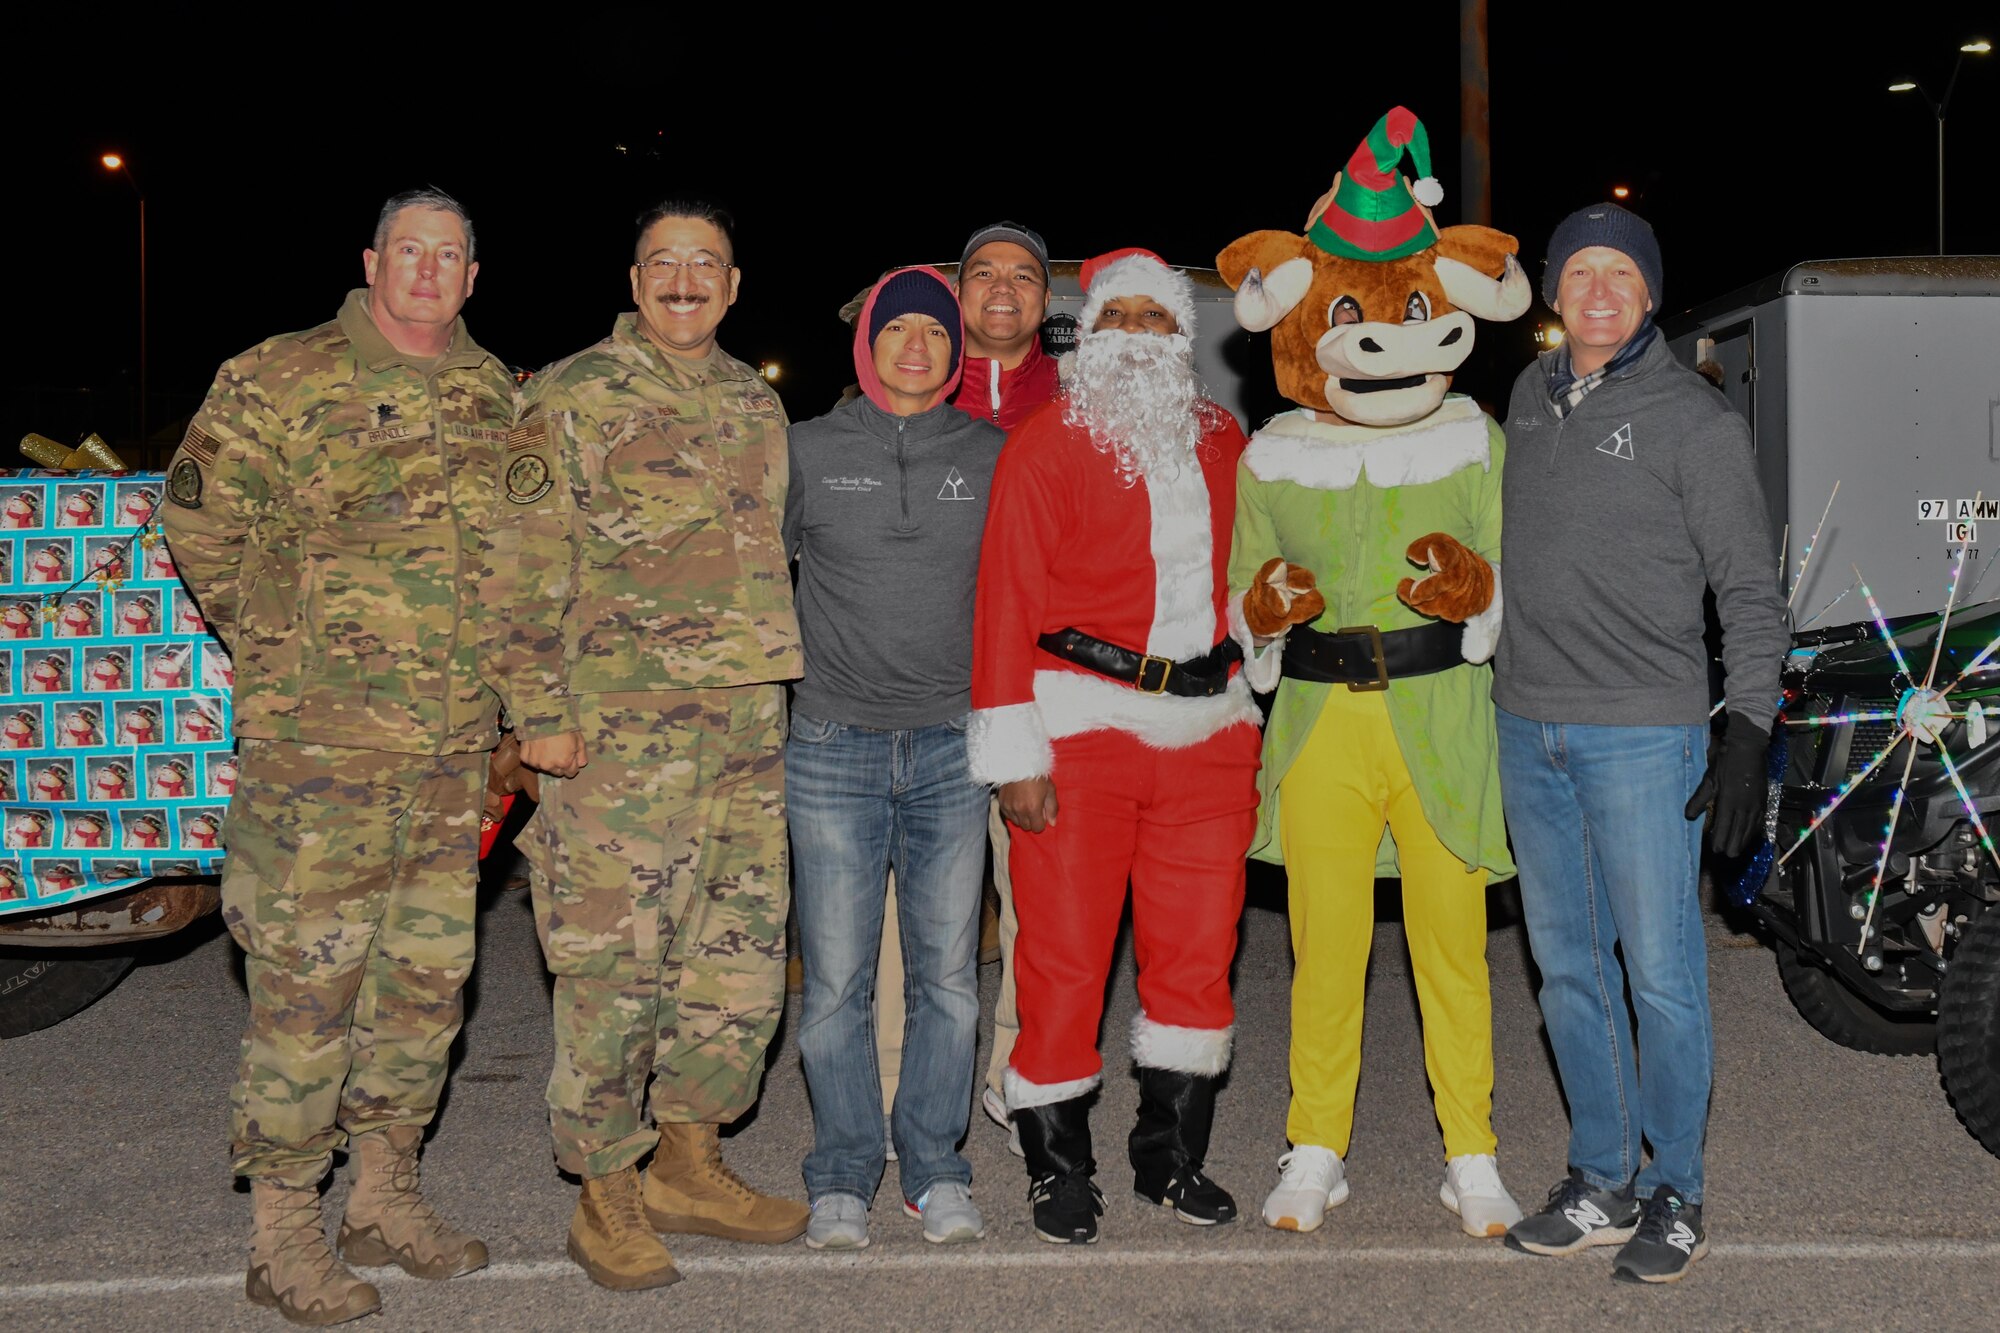 Airmen and leadership from the 97th Air Mobility Wing pose for a photo after a holiday parade at Altus Air Force Base, Oklahoma, December 13, 2022. The purpose of the parade is to provide holiday cheer and promote friendly competition. (U.S. Air Force photo by Airman 1st Class Miyah Gray)